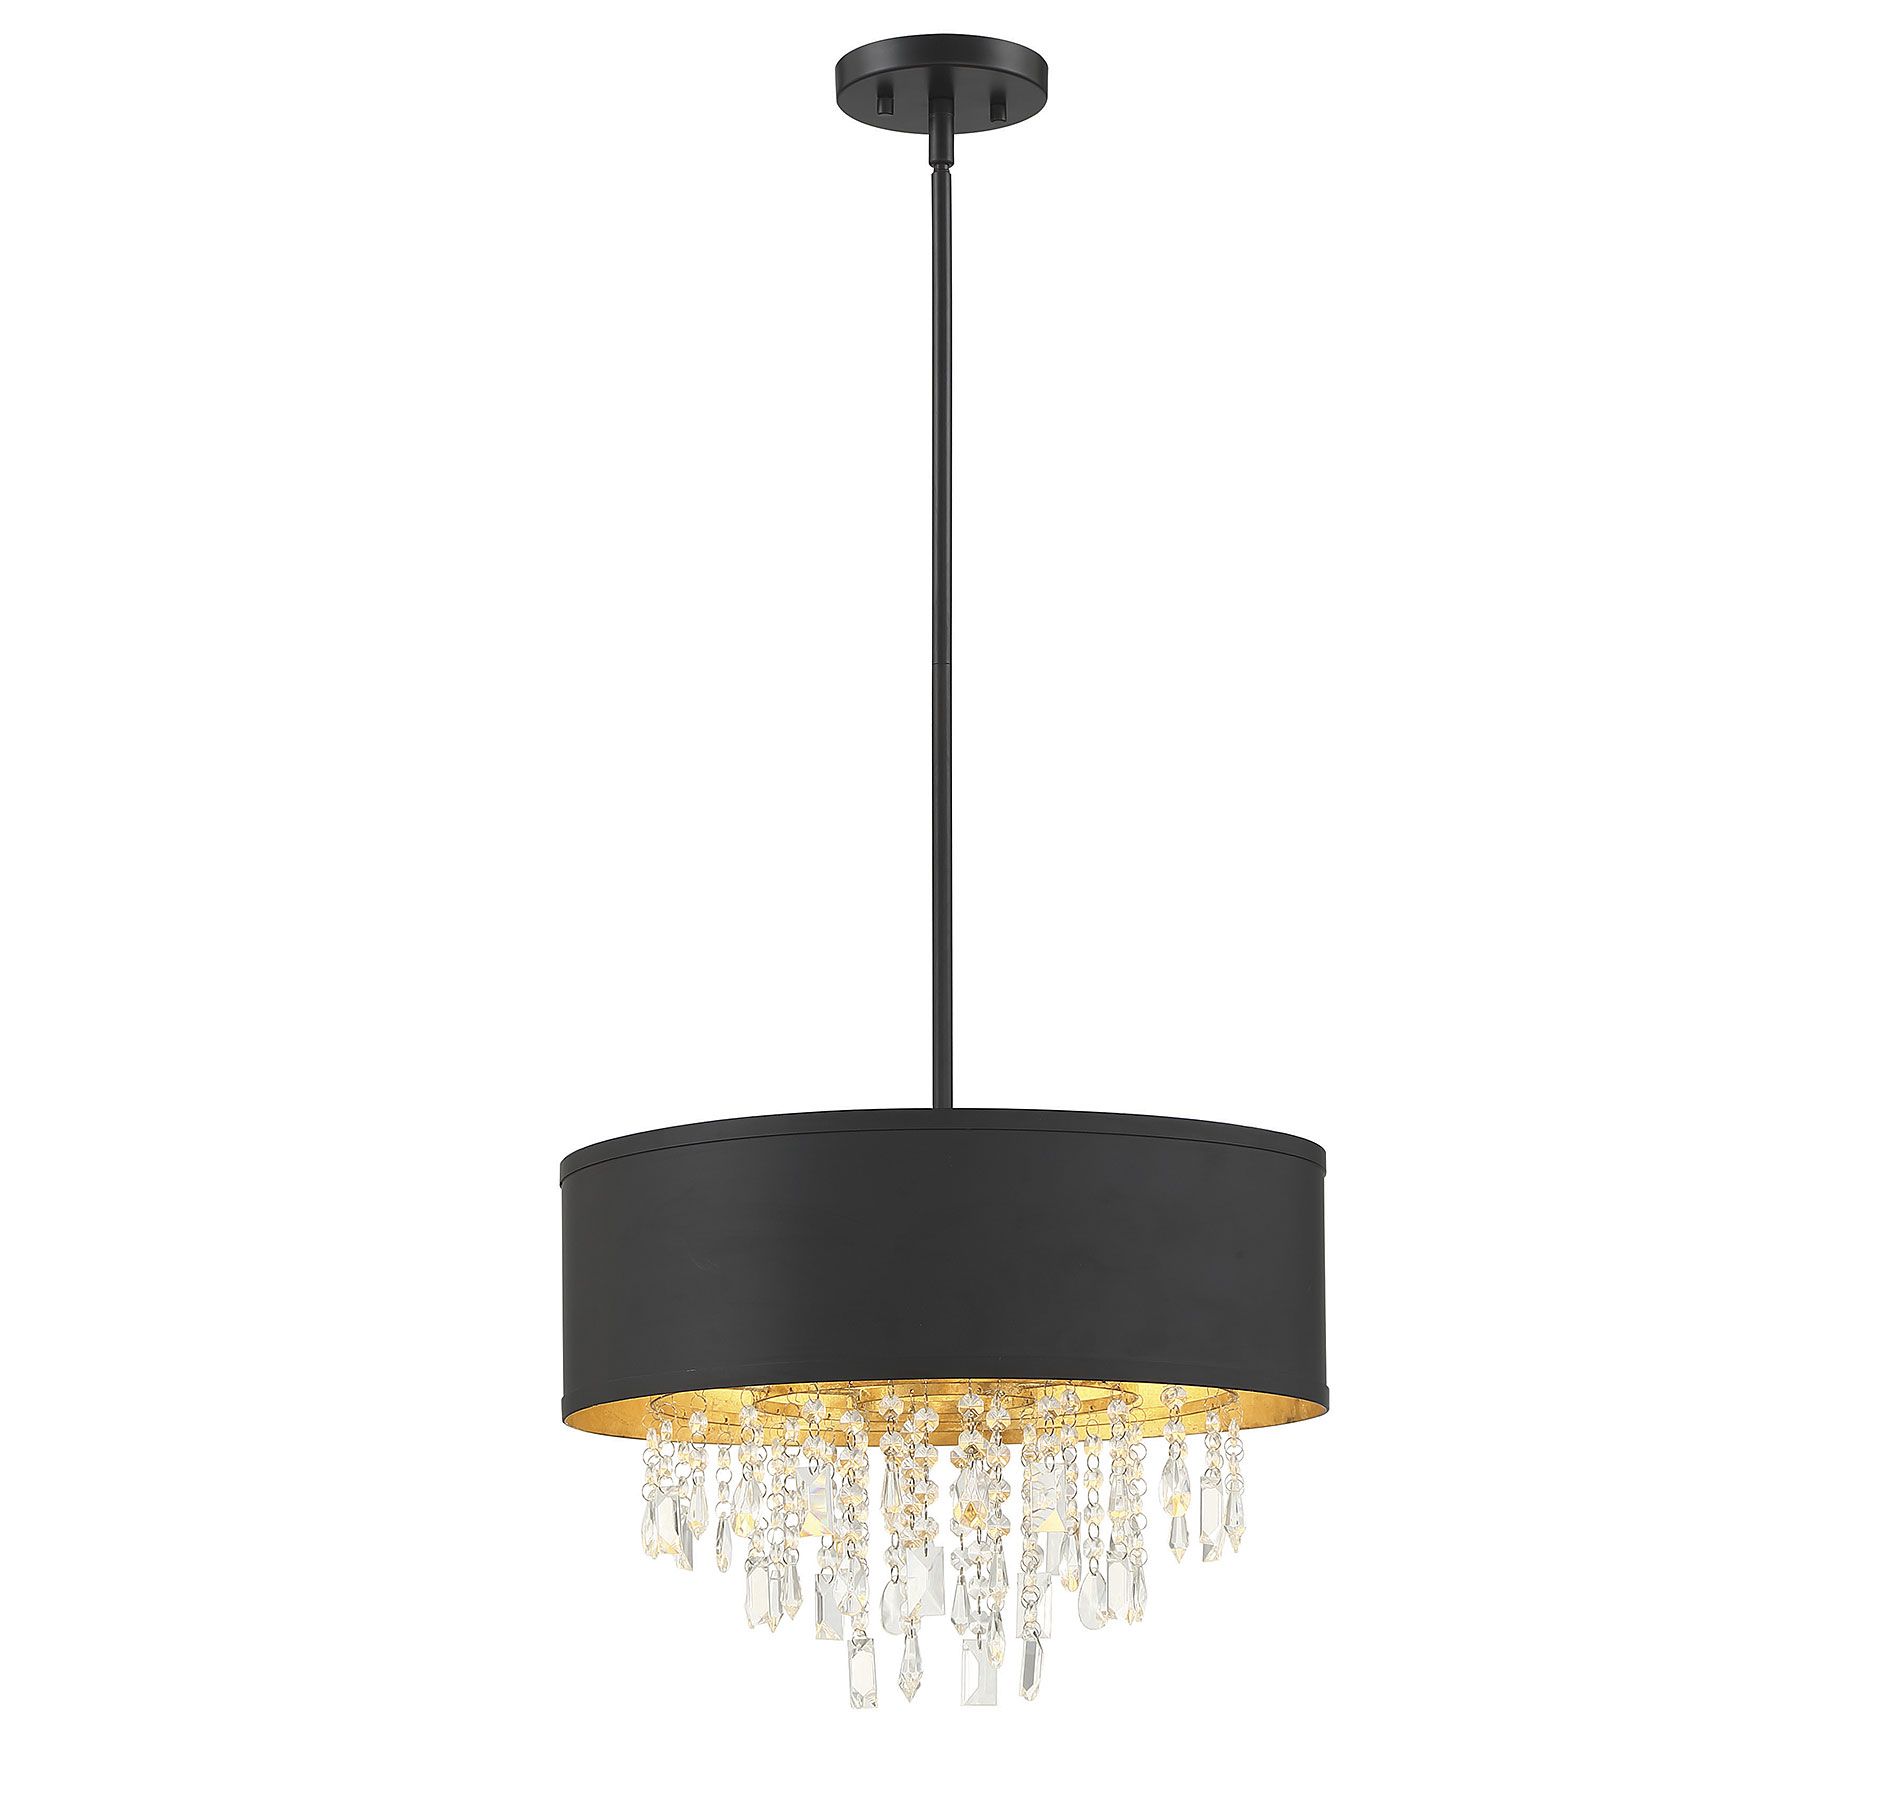 Savoy House Sparkler By Brian Thomas 4 Light Convertible Semi Flush Pendant In Black With Gold Leaf